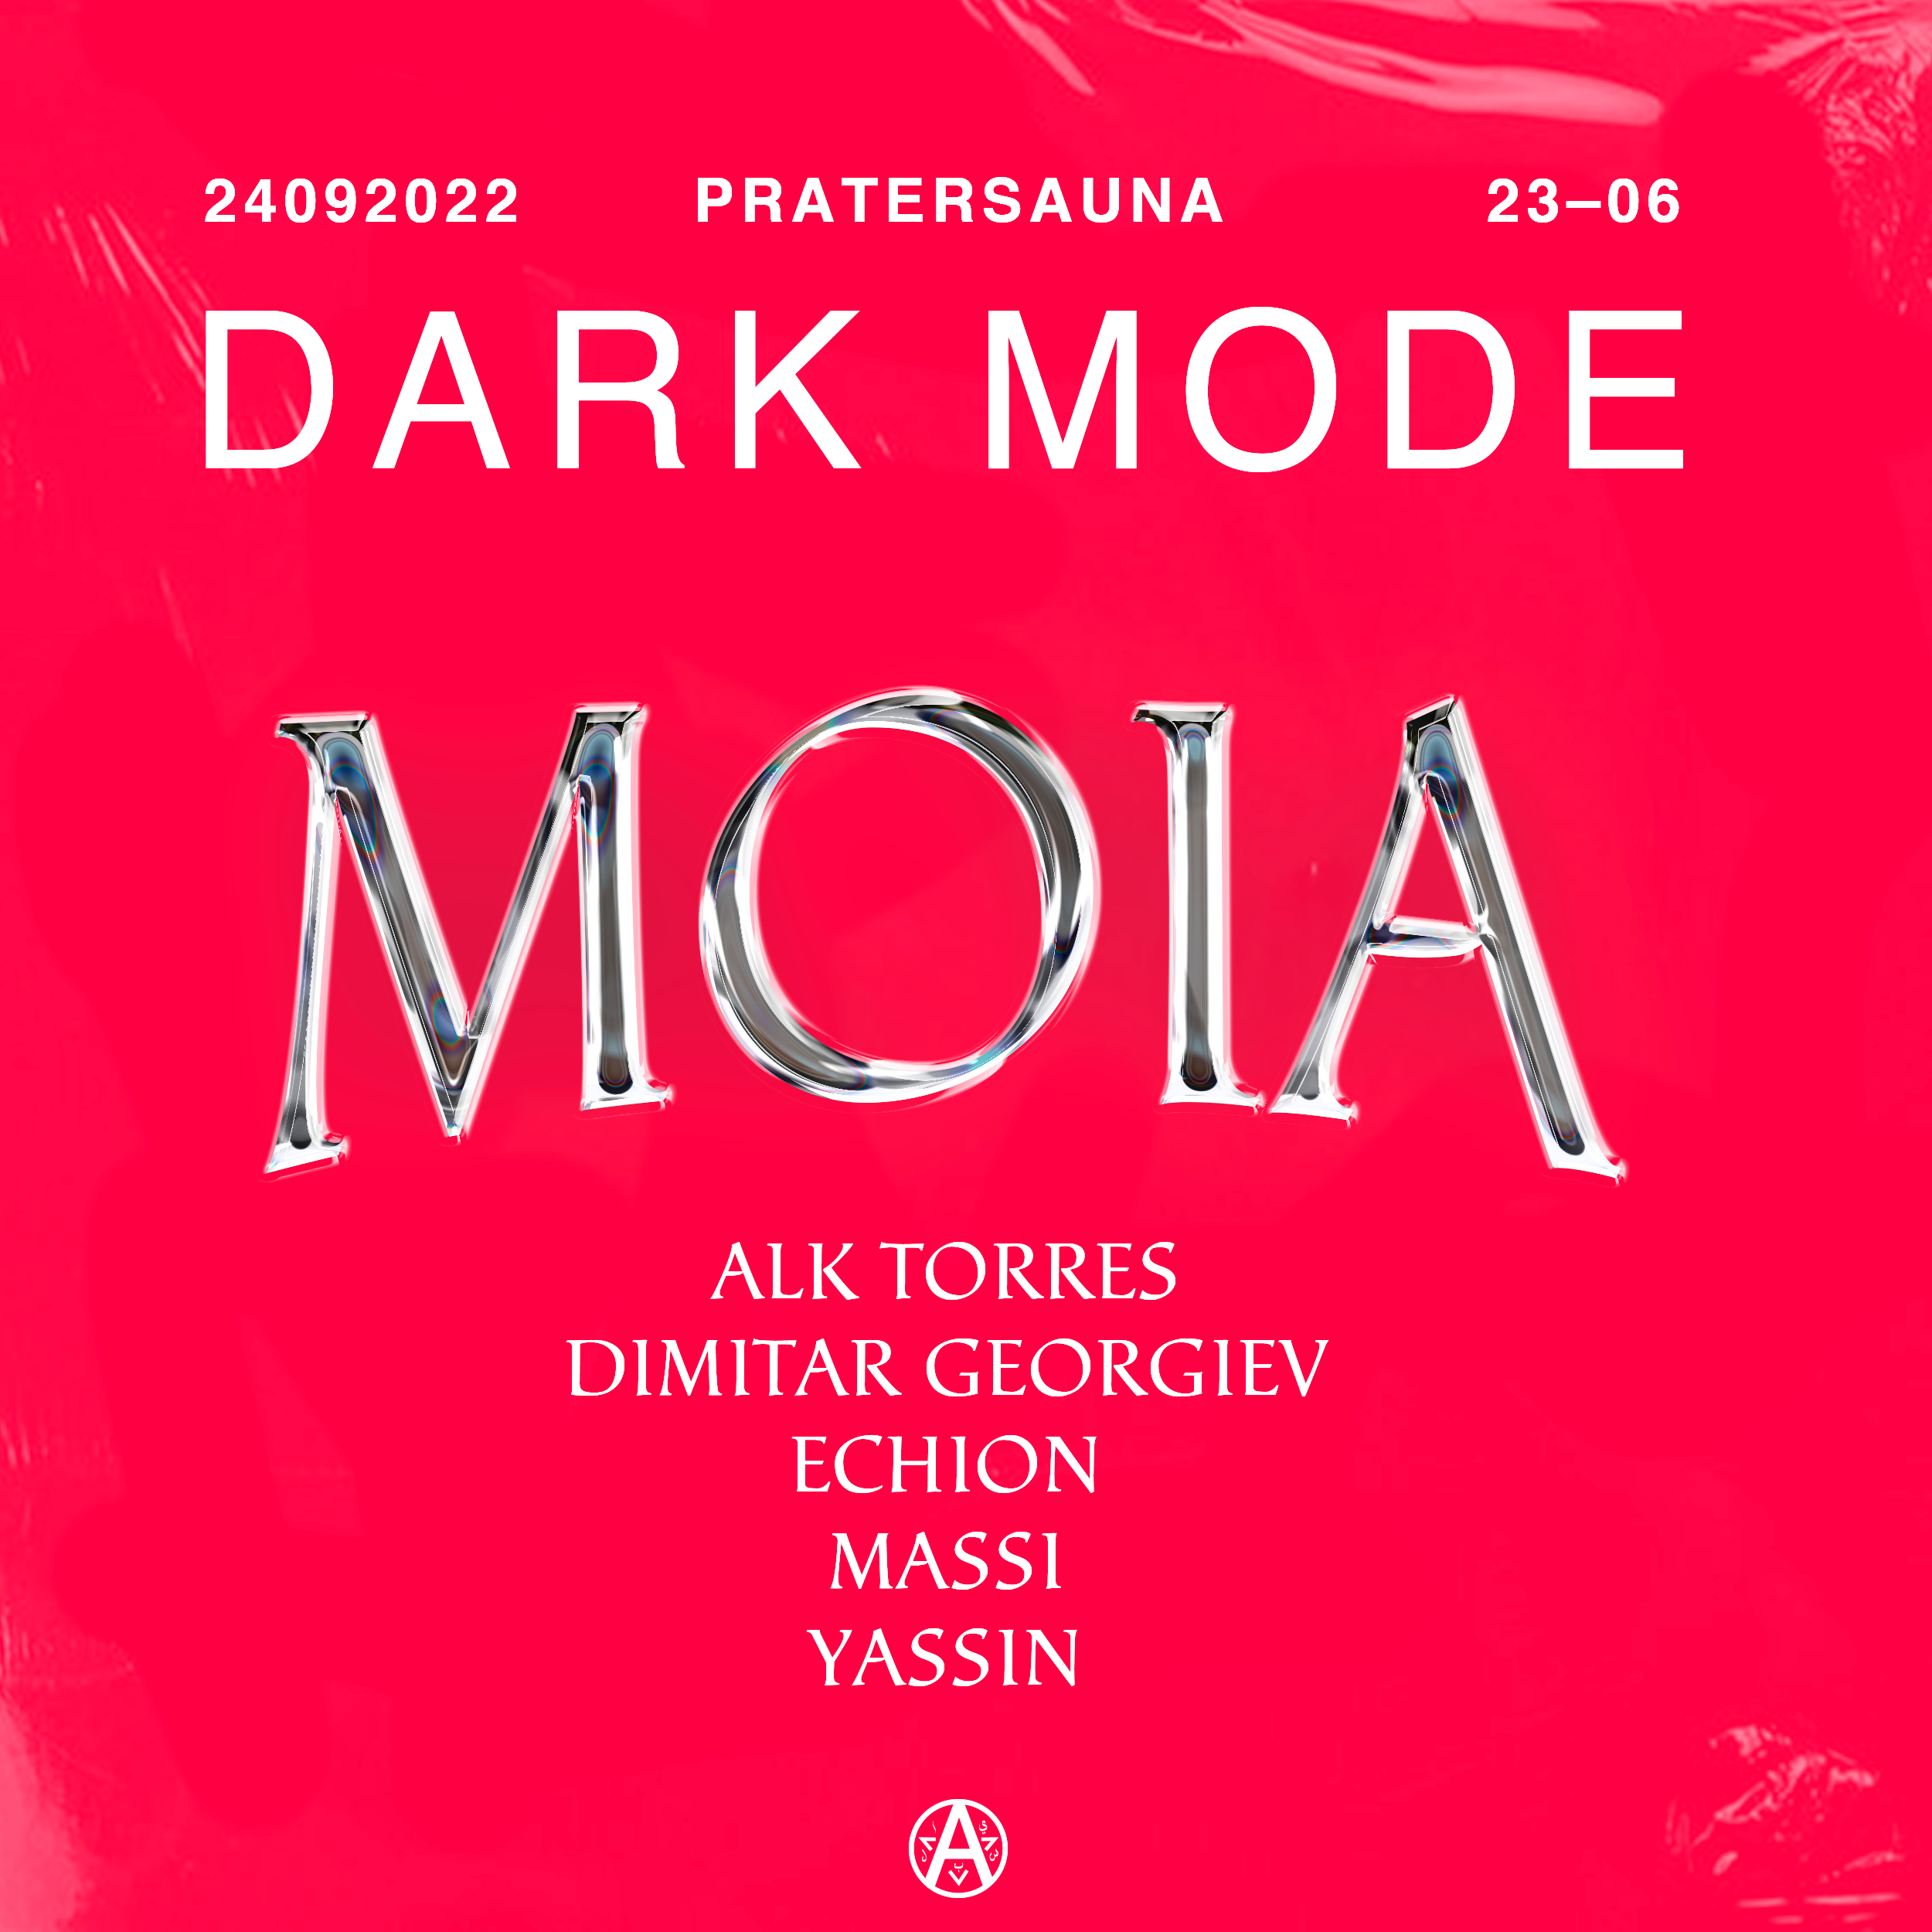 Dark Mode with MOIA - Flyer back